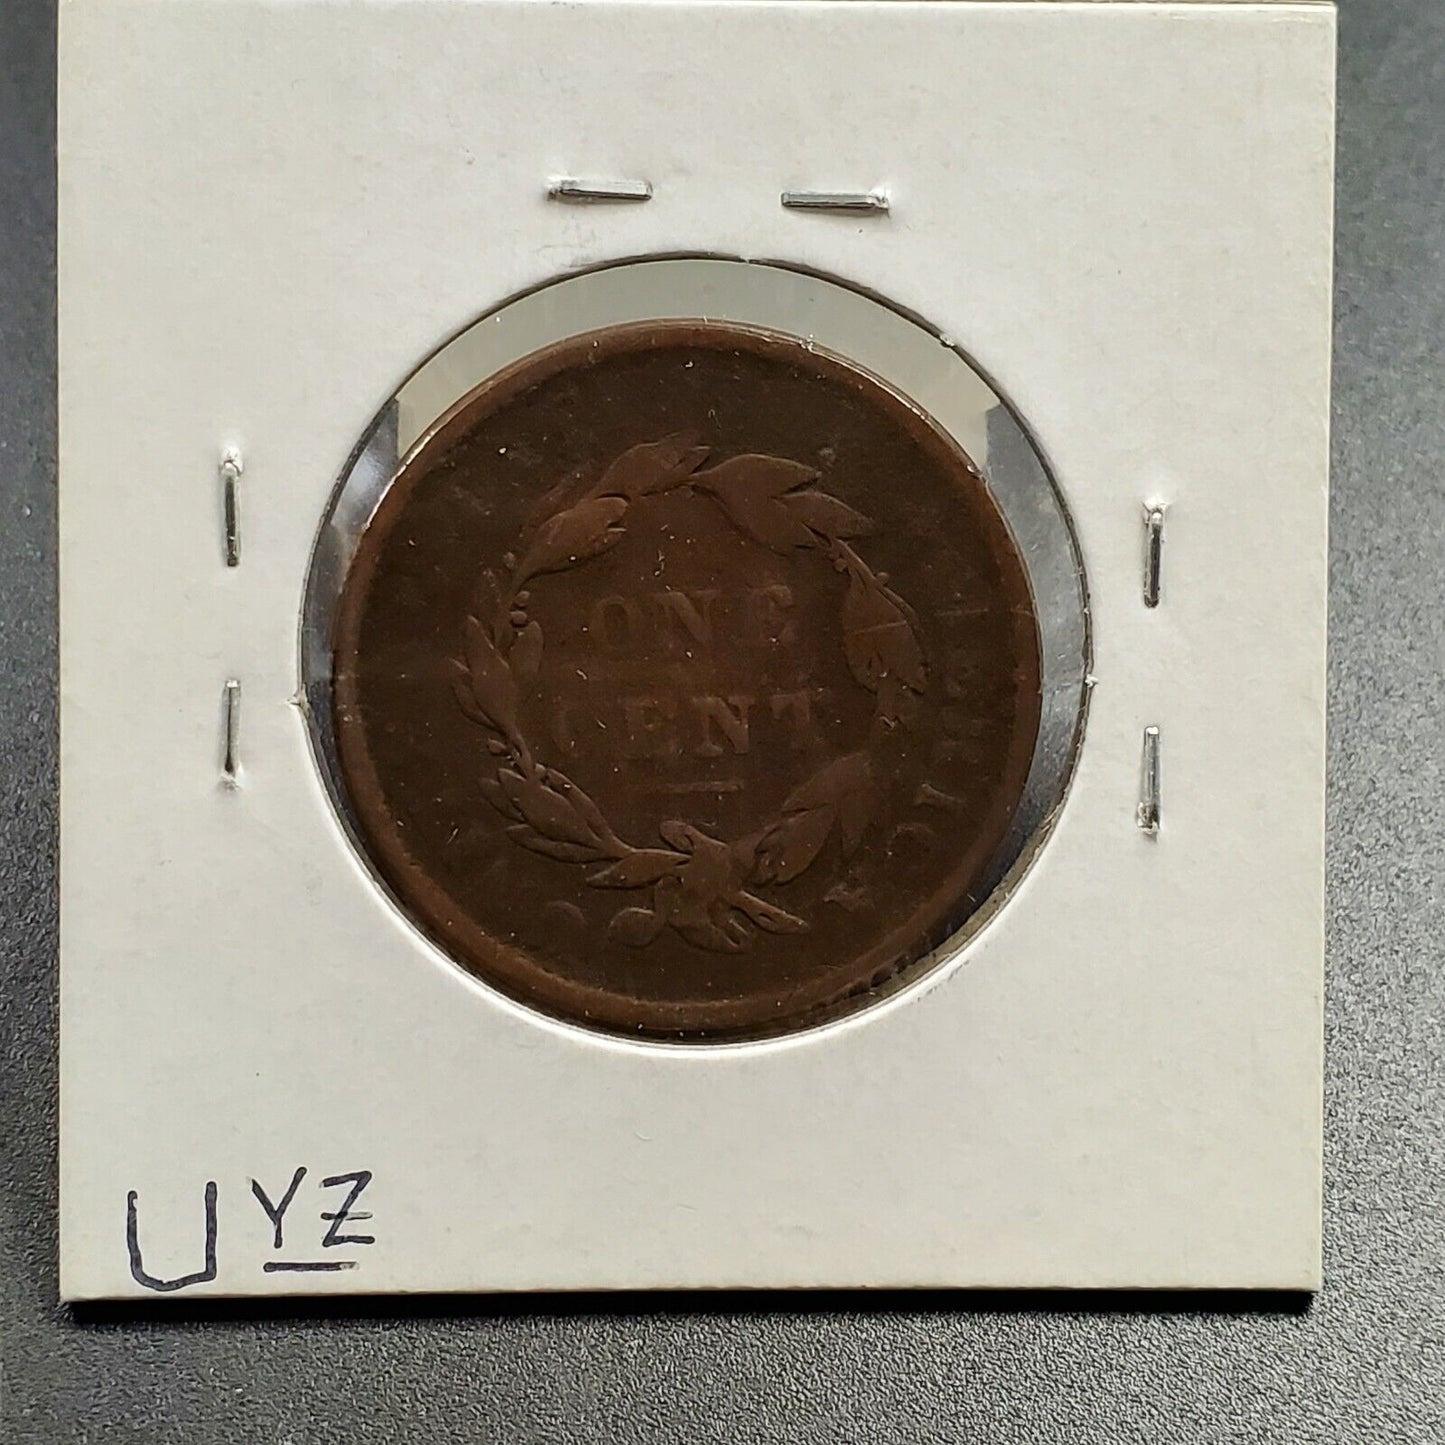 1837 Coronet Liberty Head US Large Cent 1c Ch Circulated Small Letters Variety